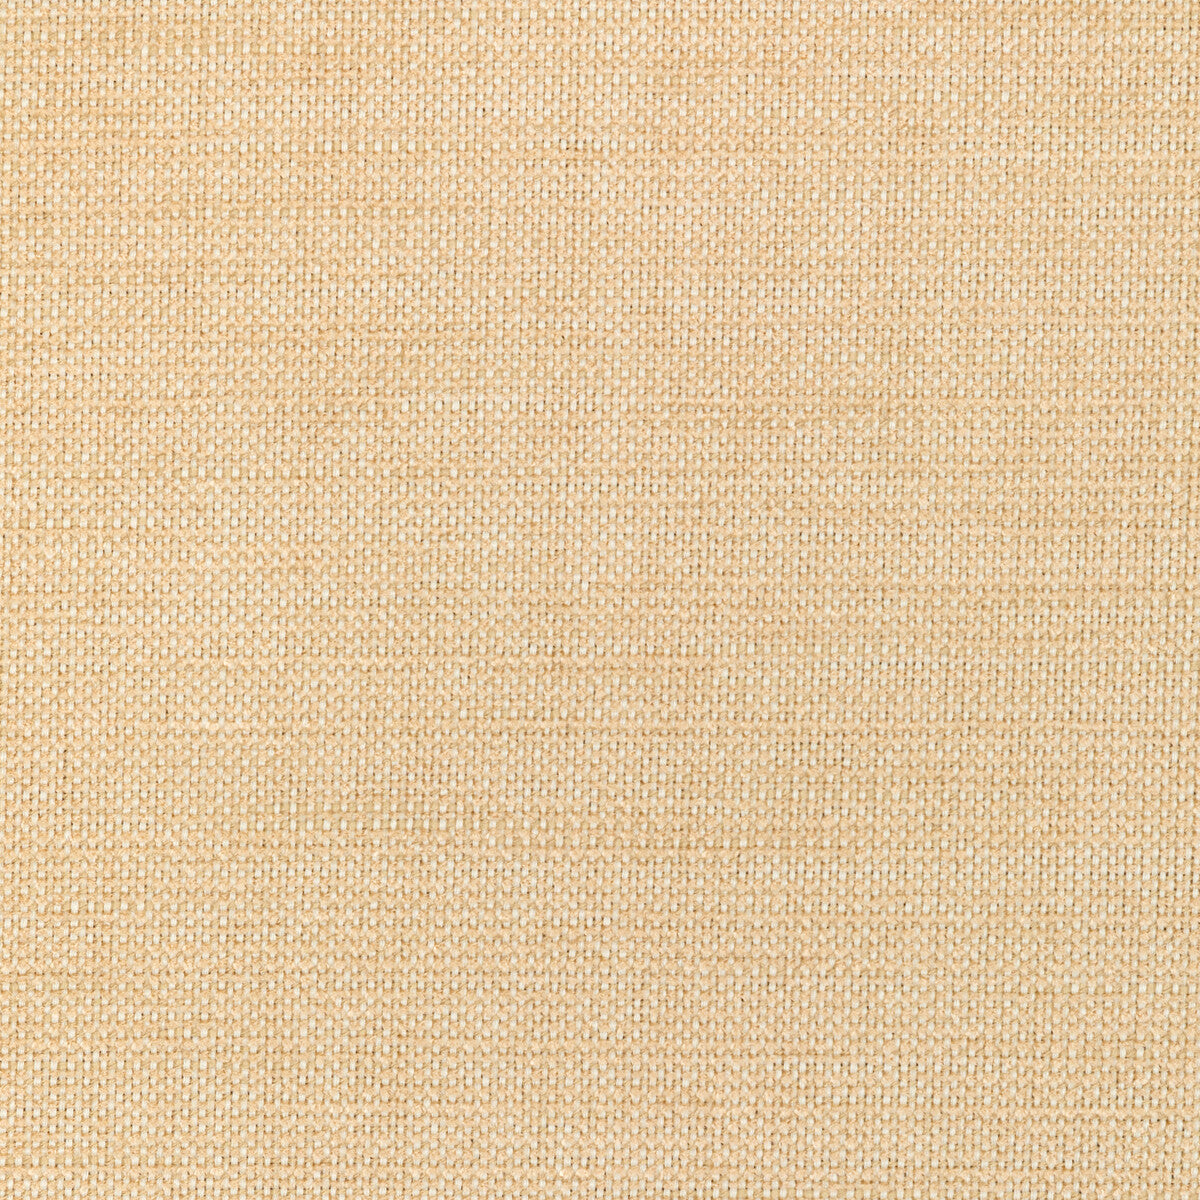 Kravet Smart fabric in 36302-116 color - pattern 36302.116.0 - by Kravet Smart in the Performance Crypton Home collection